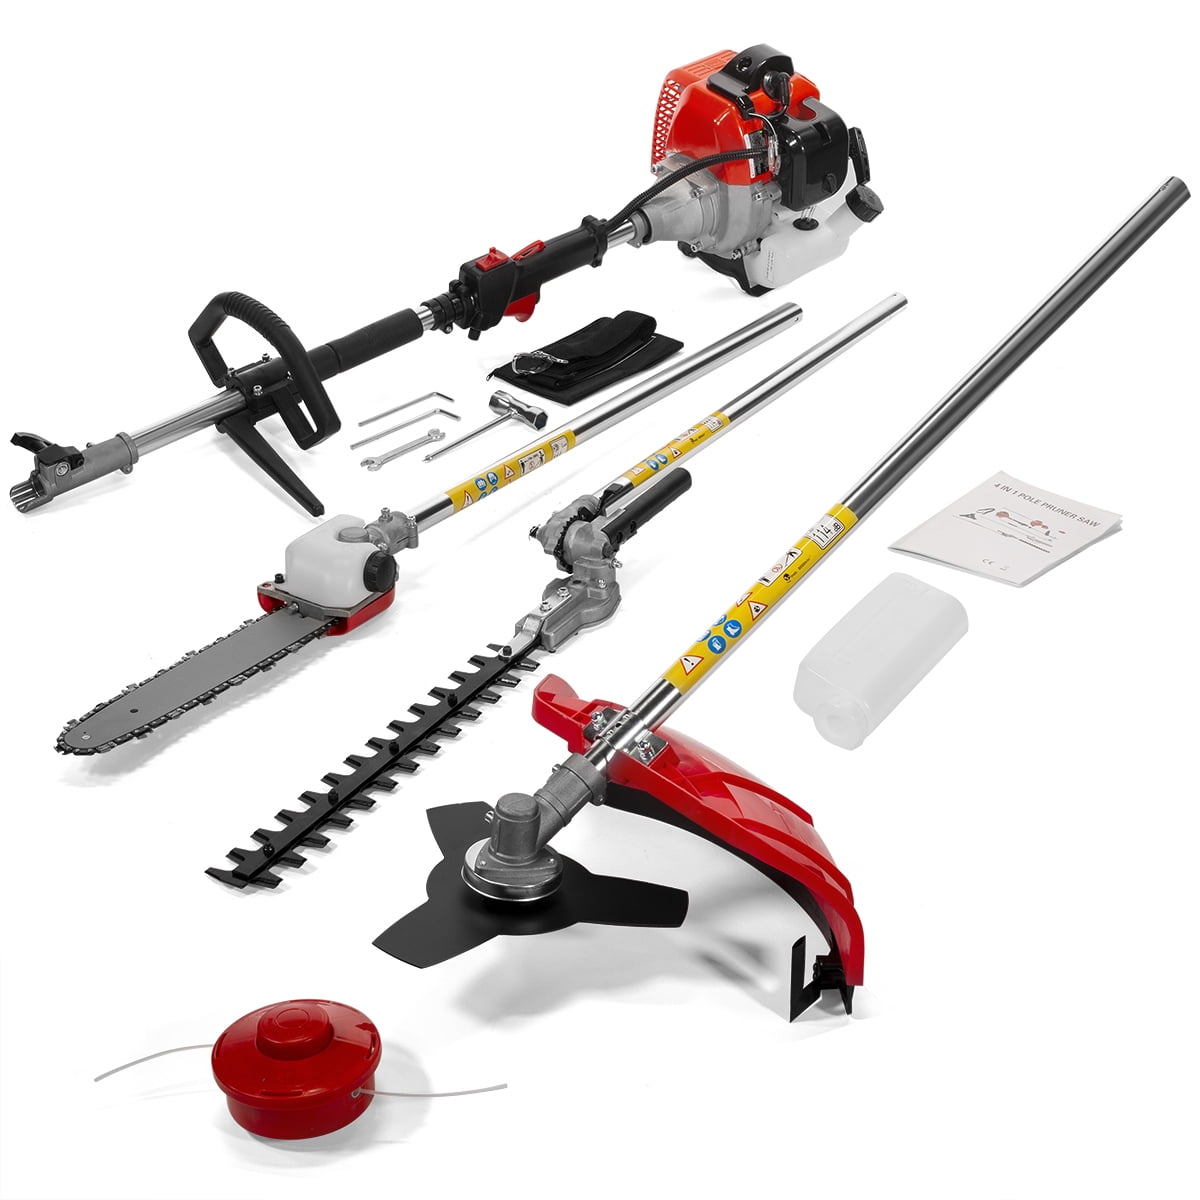 Stark 4 IN 1 Gas Pole Saw Multi Yard Chainsaw Hedge Trimmer Line